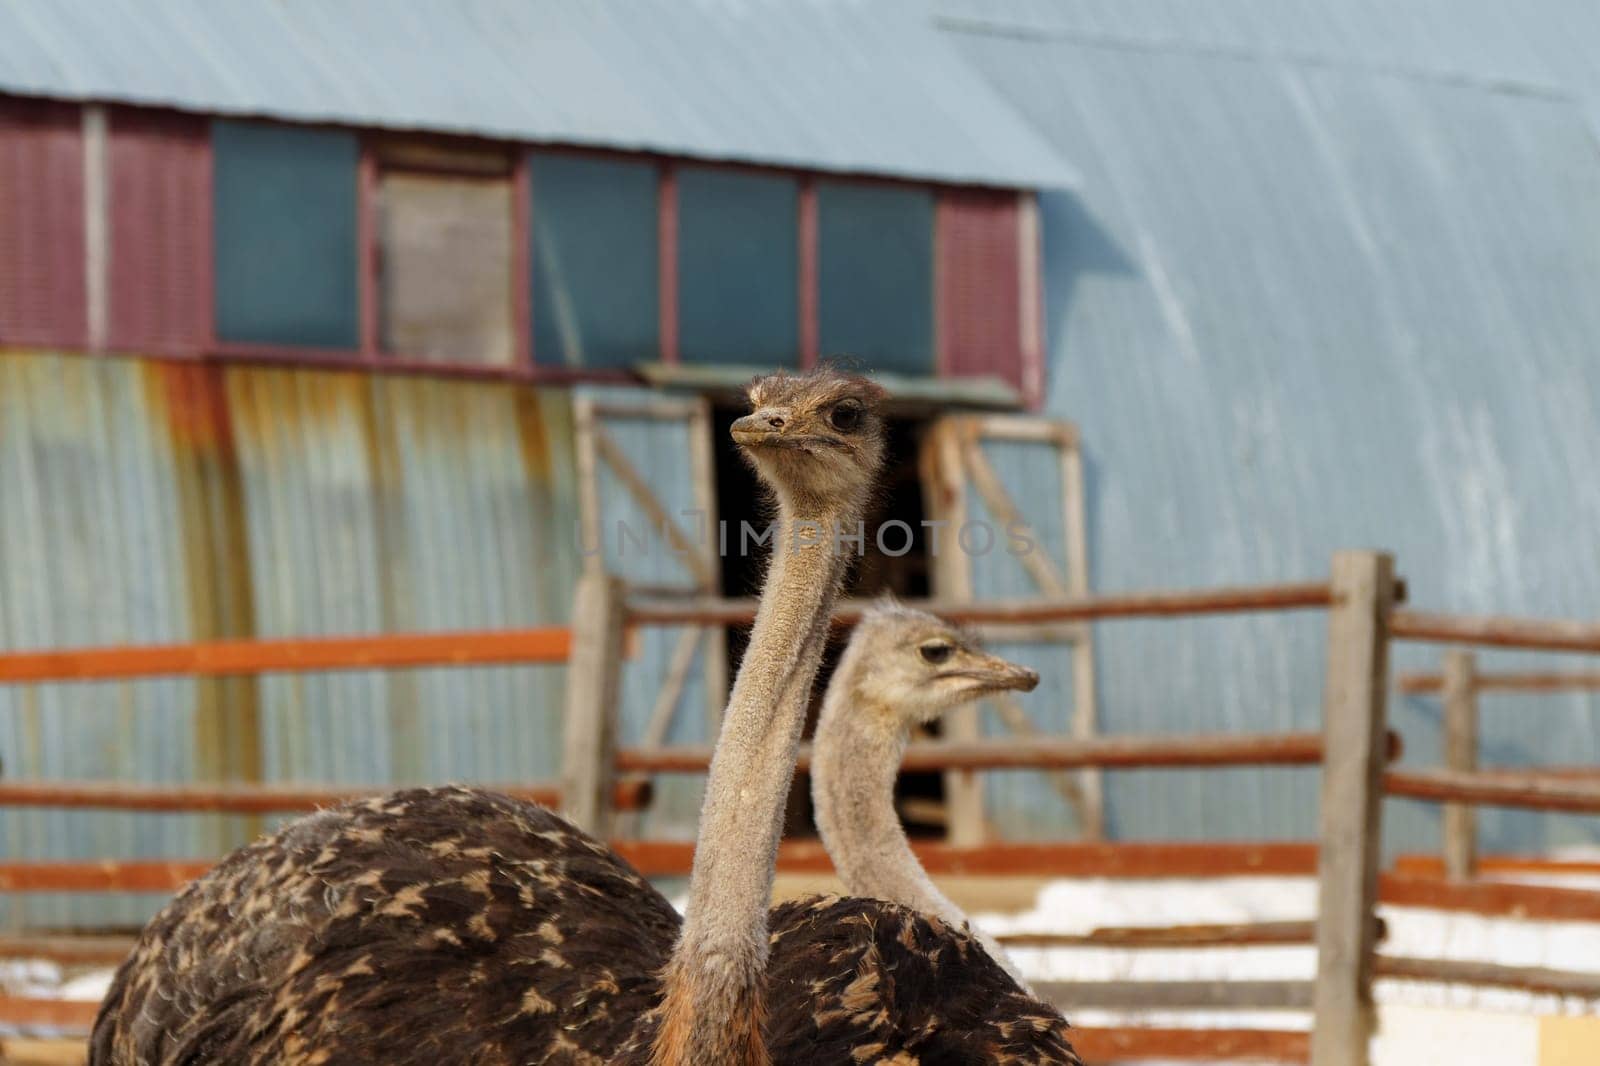 Group of ostriches standing tall and proud next to a sturdy wooden fence, showcasing.